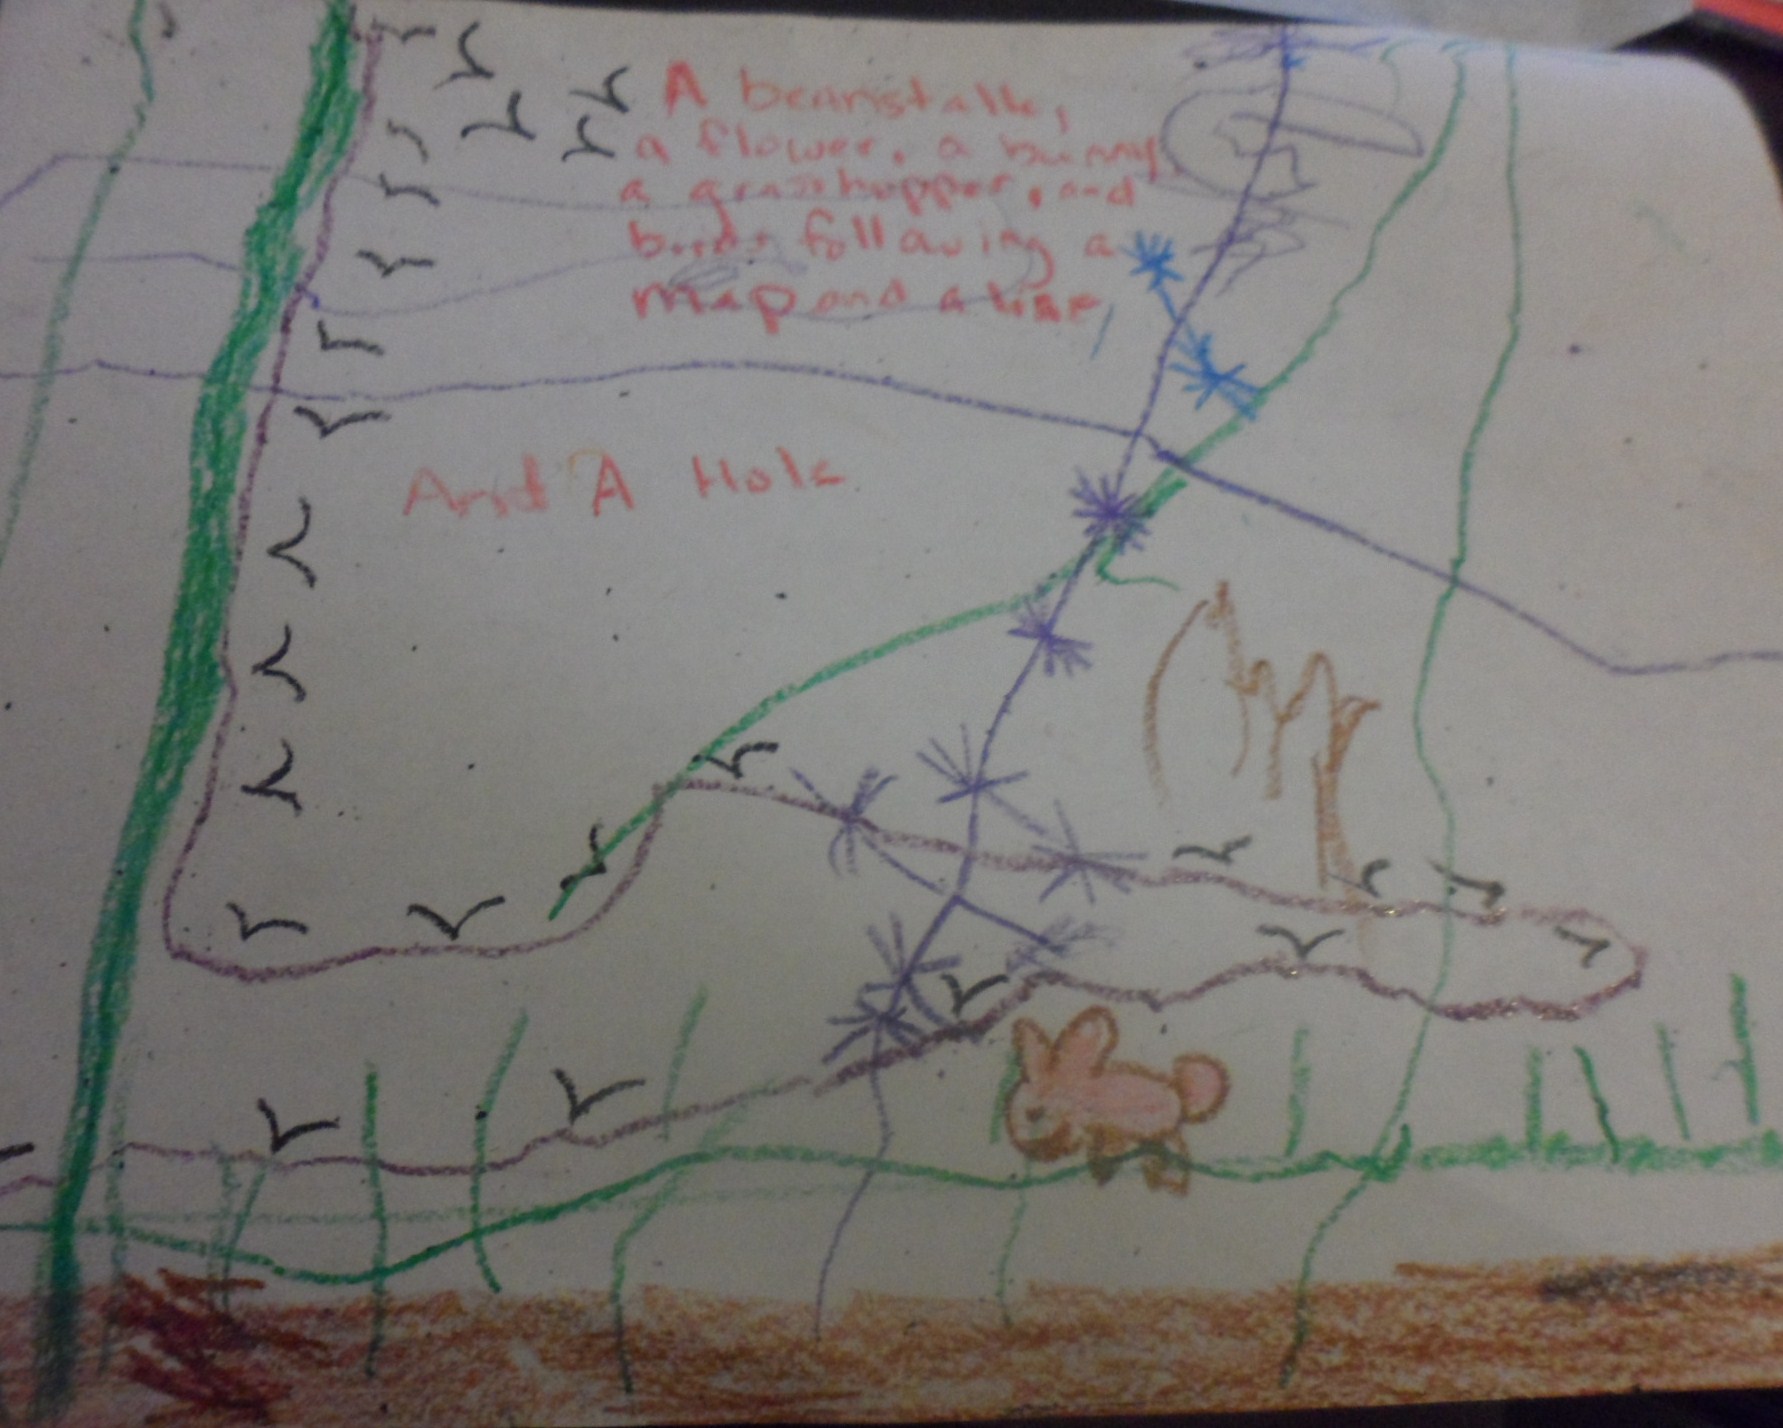 "A beanstalk, a flower, a bunny, a grasshopper, and birds following a map and a line, and a hole."